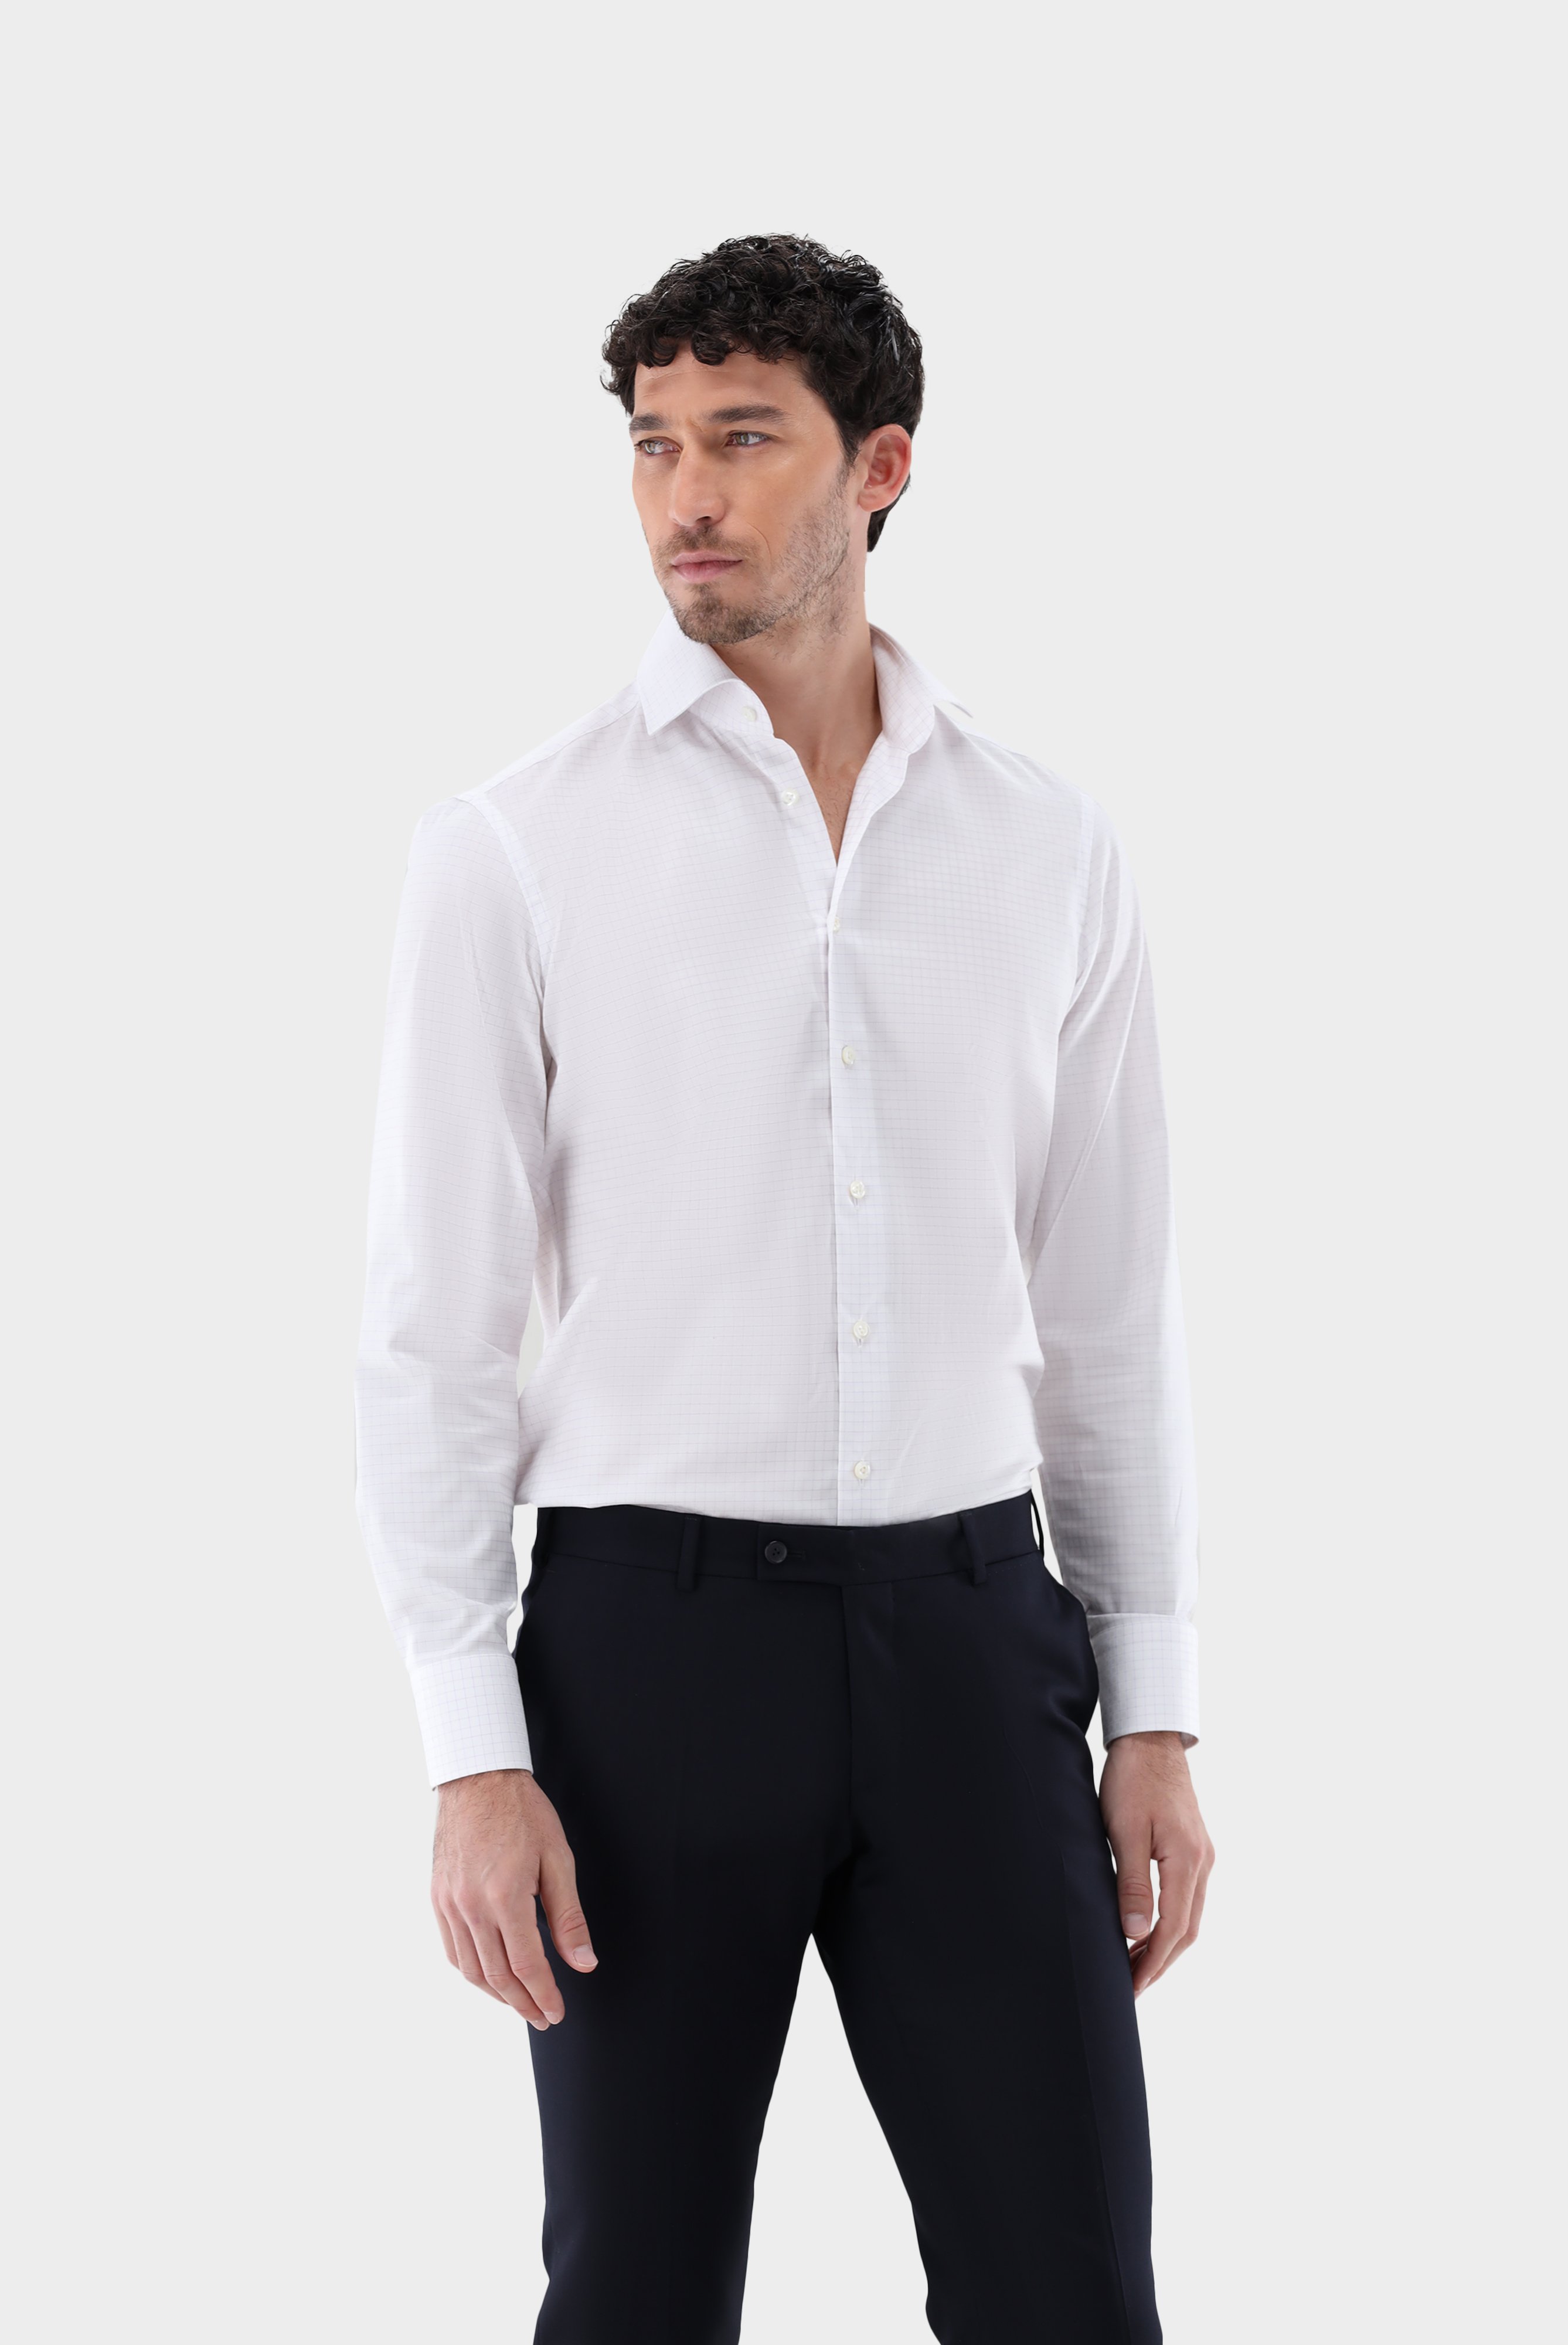 Pinchecked Fine Twill Wrinkle Free Shirt Tailor Fit